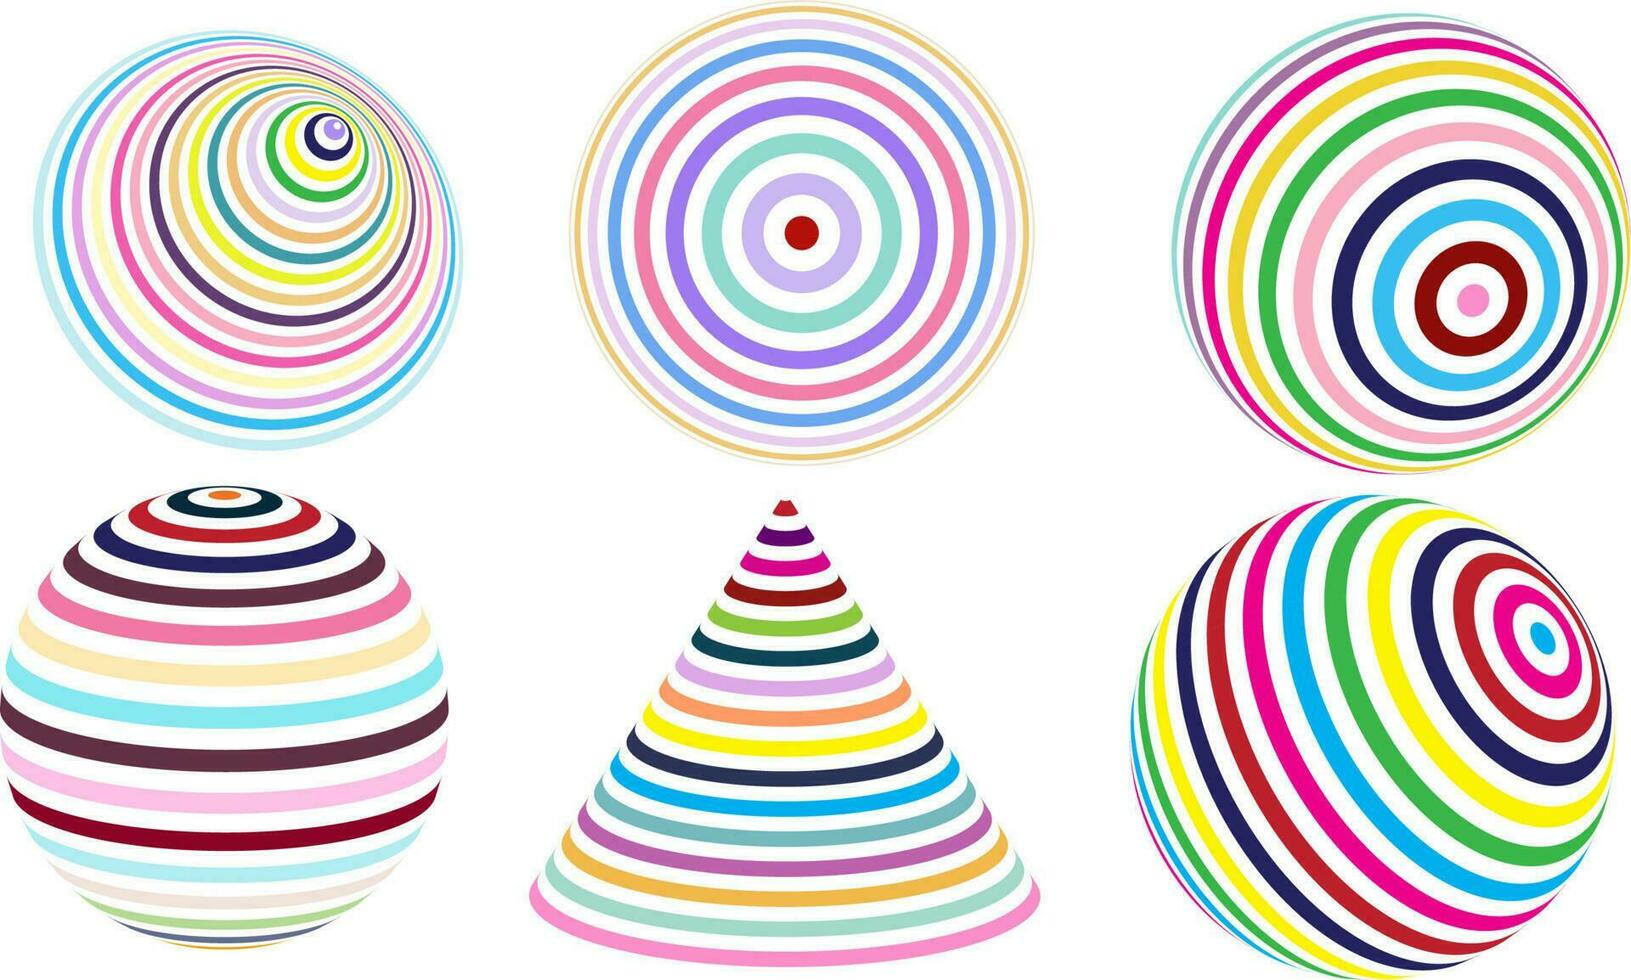 Striped balls 3D. Colourful abstract background. Vector spiral diagonal swirls illusion effect illustration. Party Hat vector, Swirl circular line, Colorful round vector